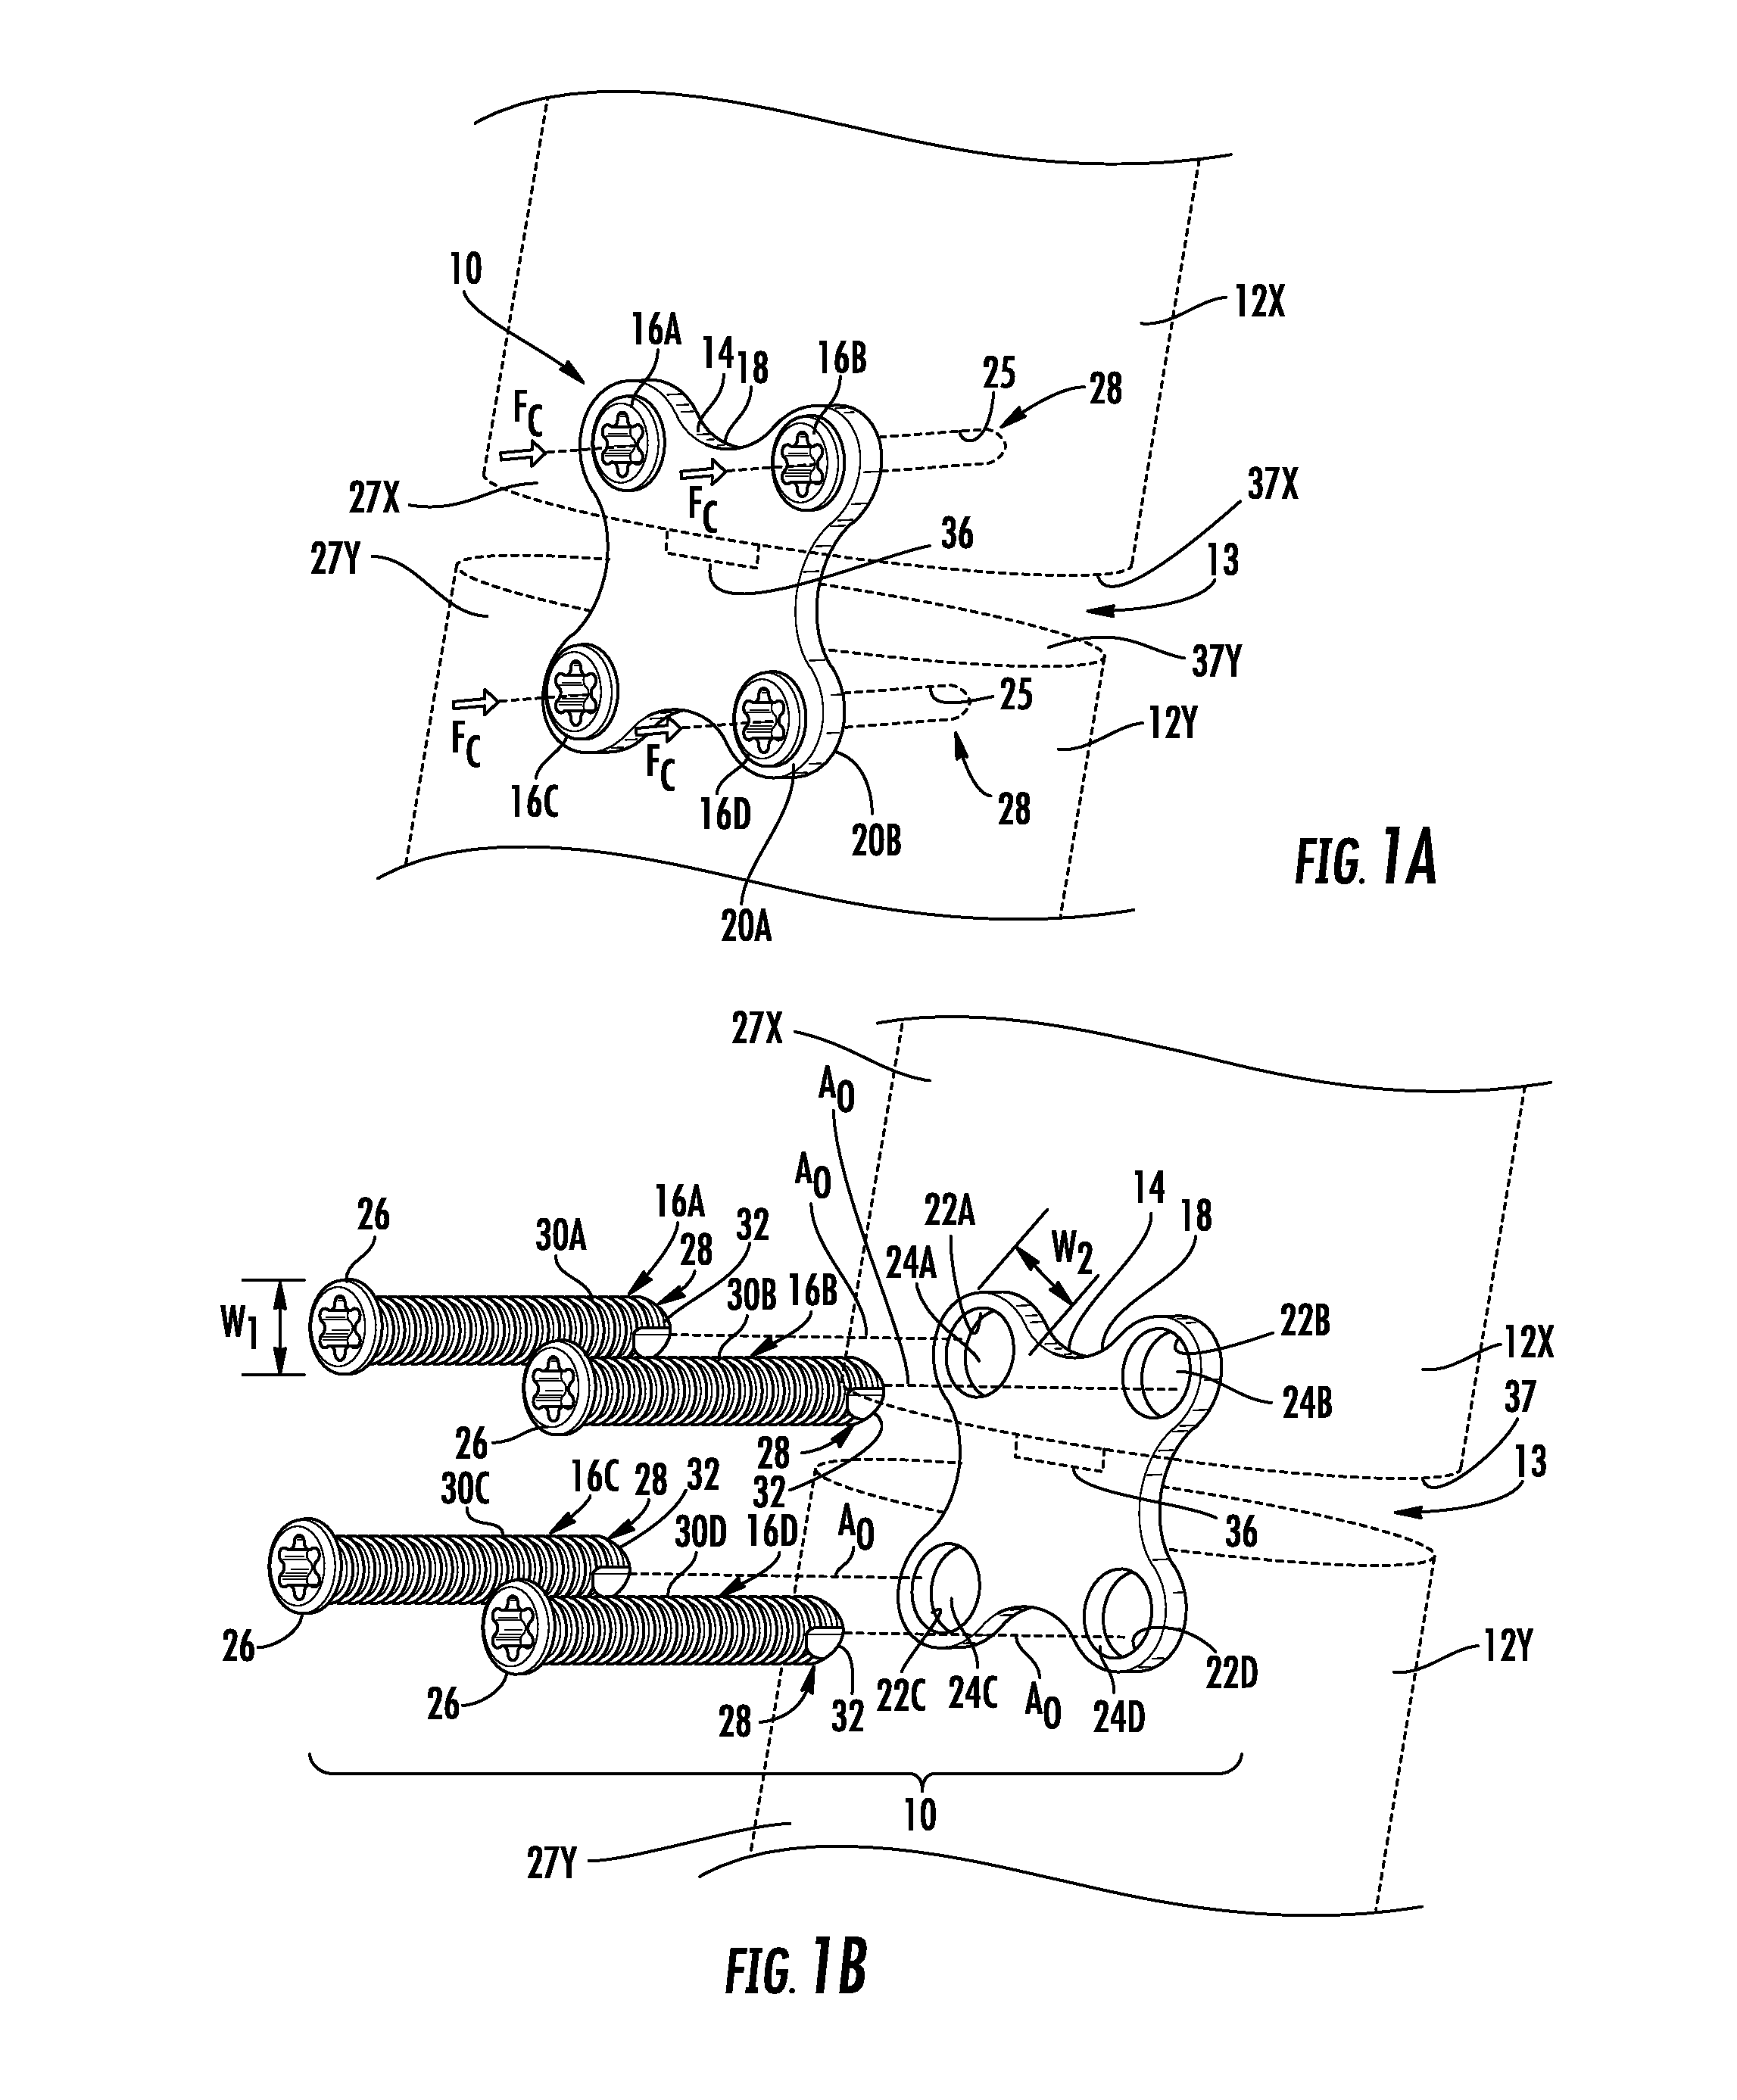 Anterior Cervical Plates For Spinal Surgery Employing Anchor Blackout Prevention Devices, And Related Systems And Methods